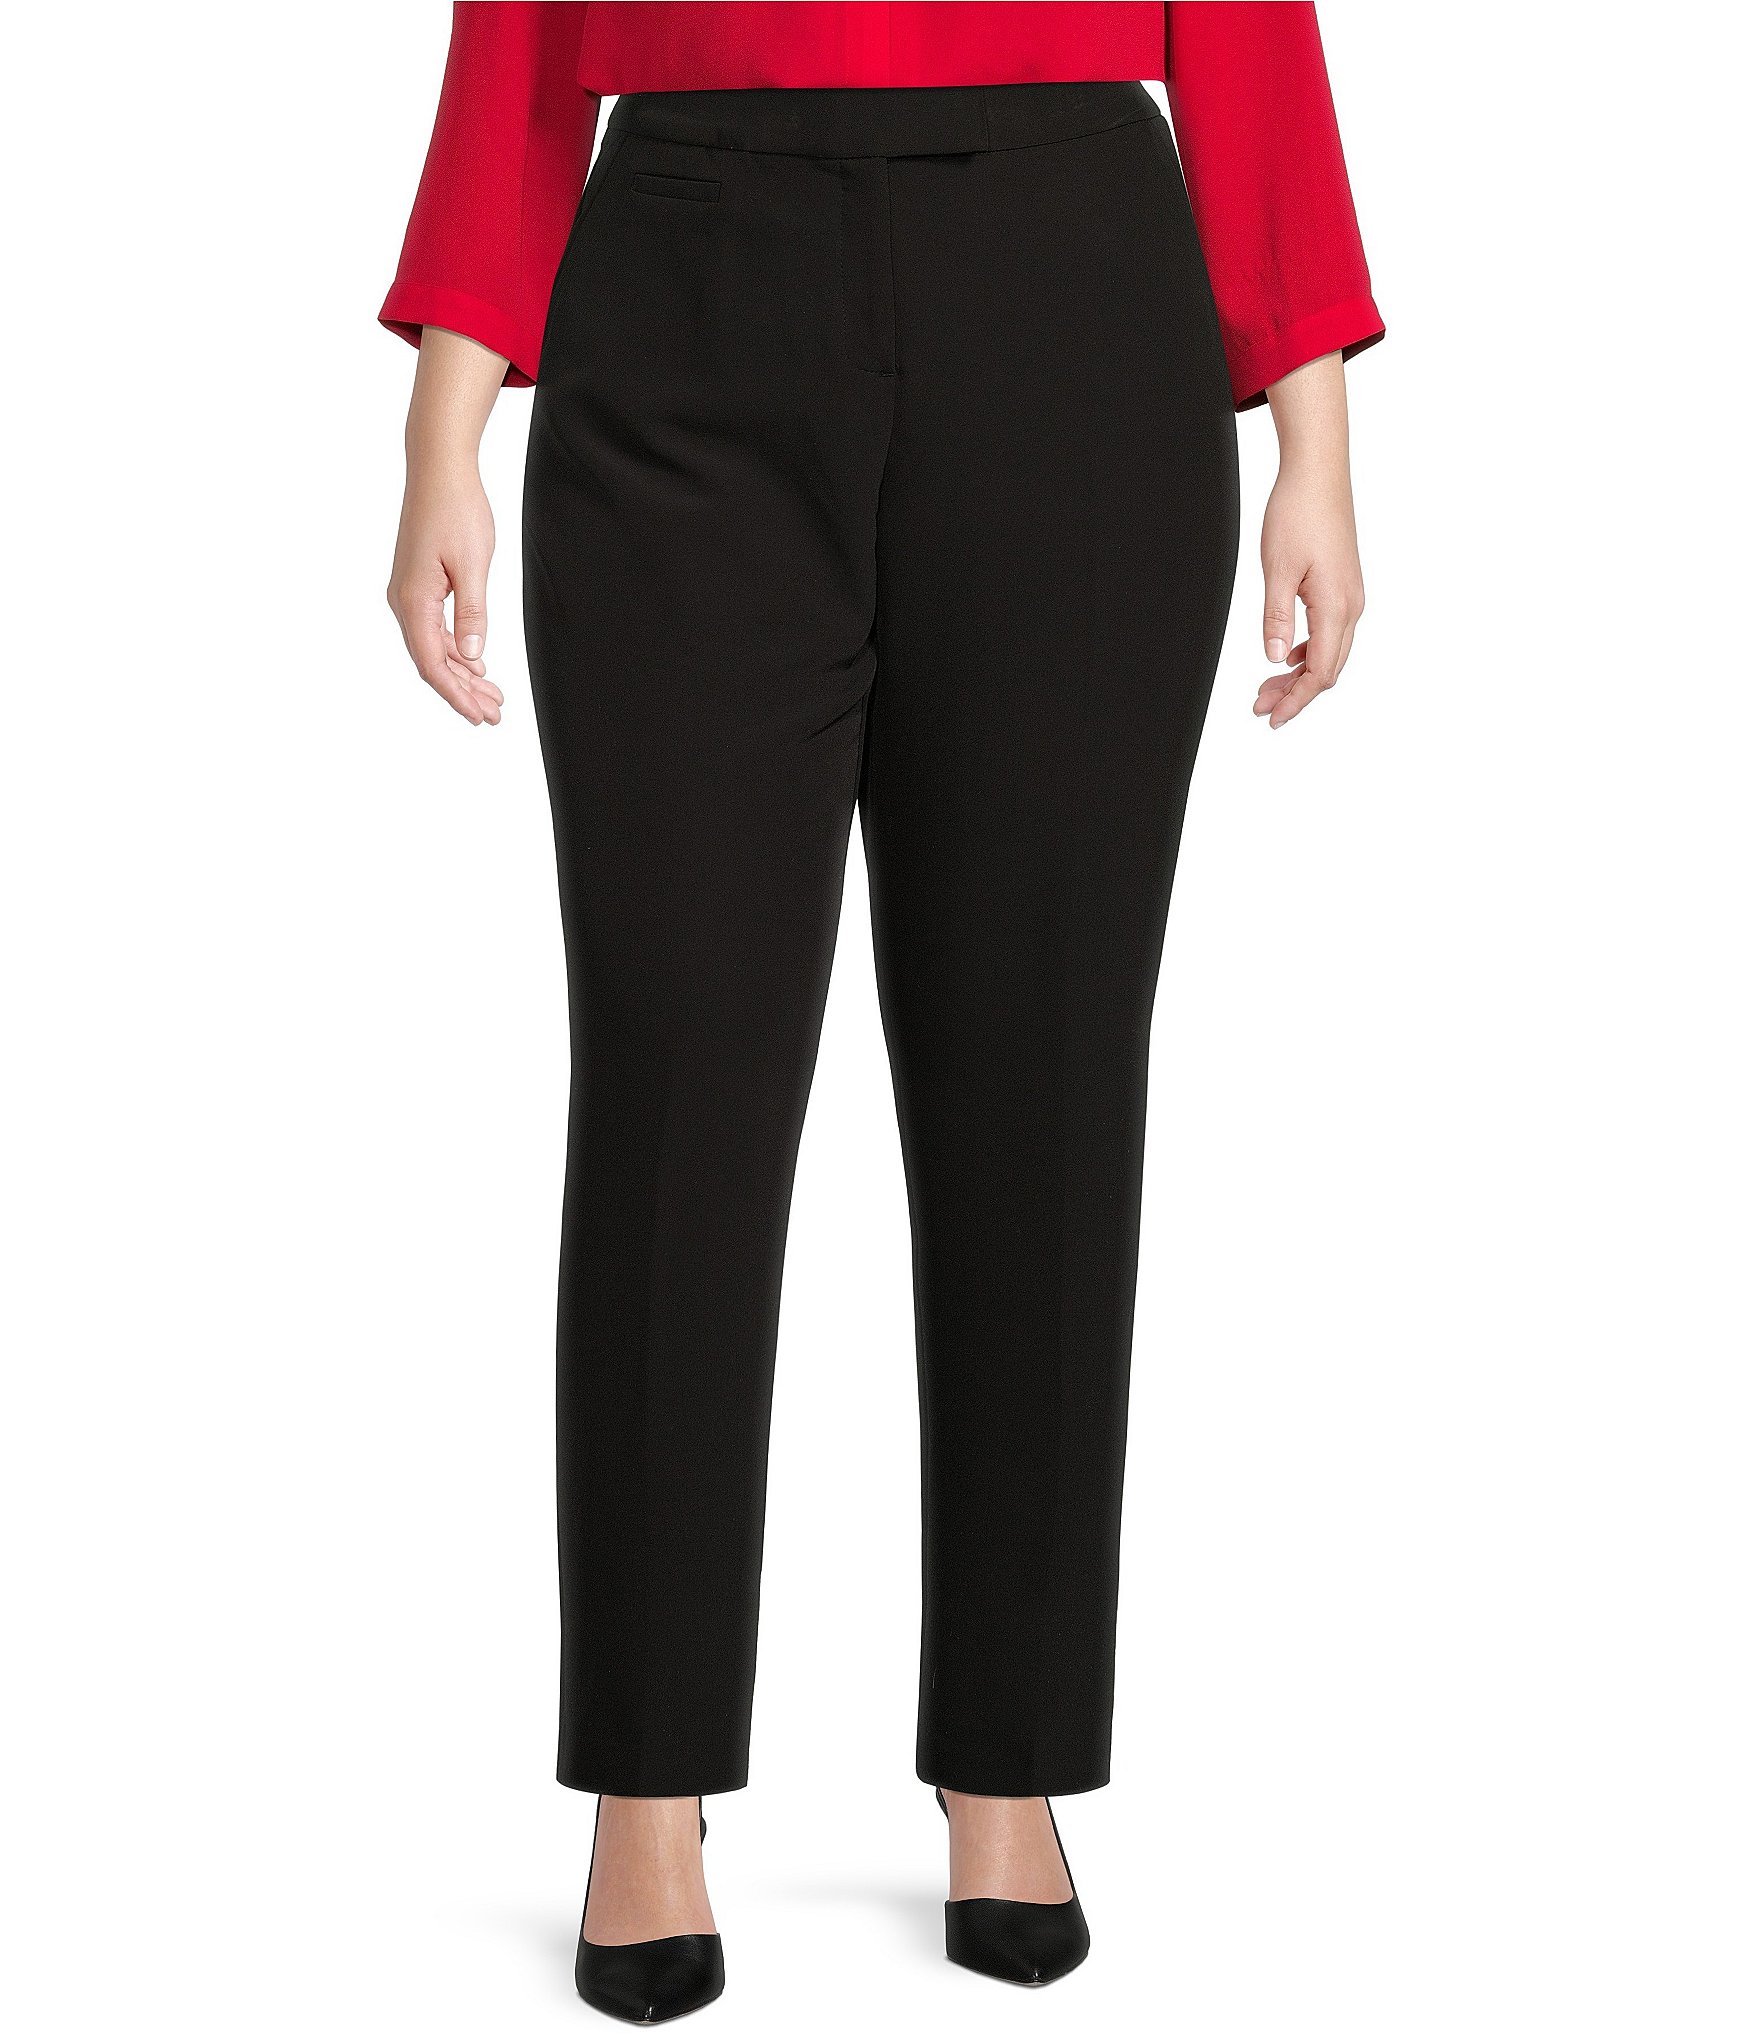 22w: Plus-Size Suits and Workwear Pants